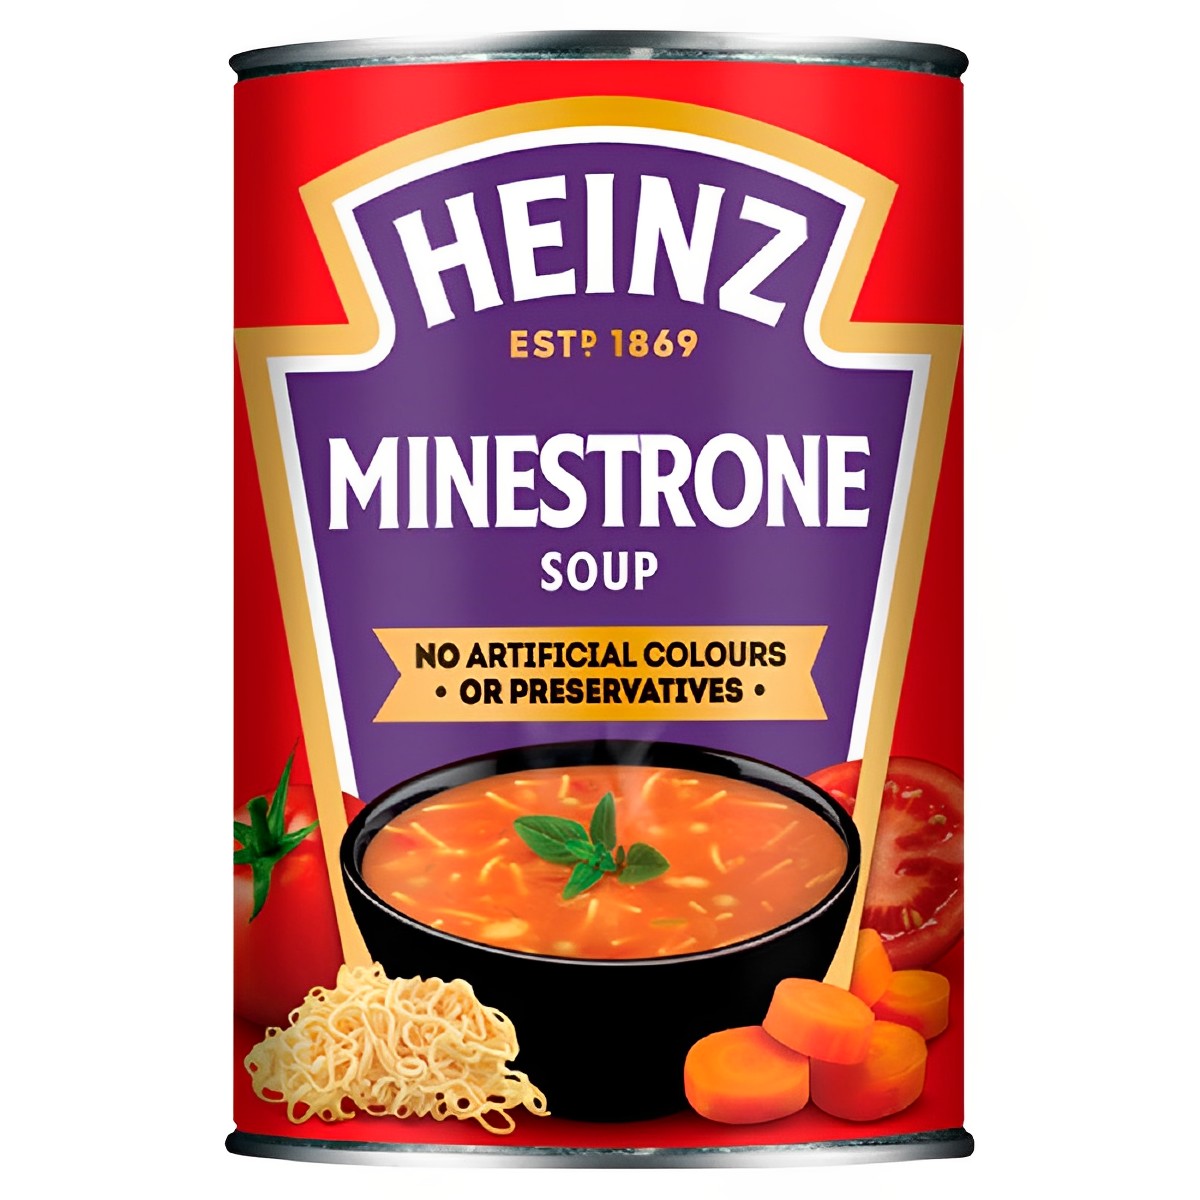 Heinz - Minestrone Soup - 400g - Continental Food Store